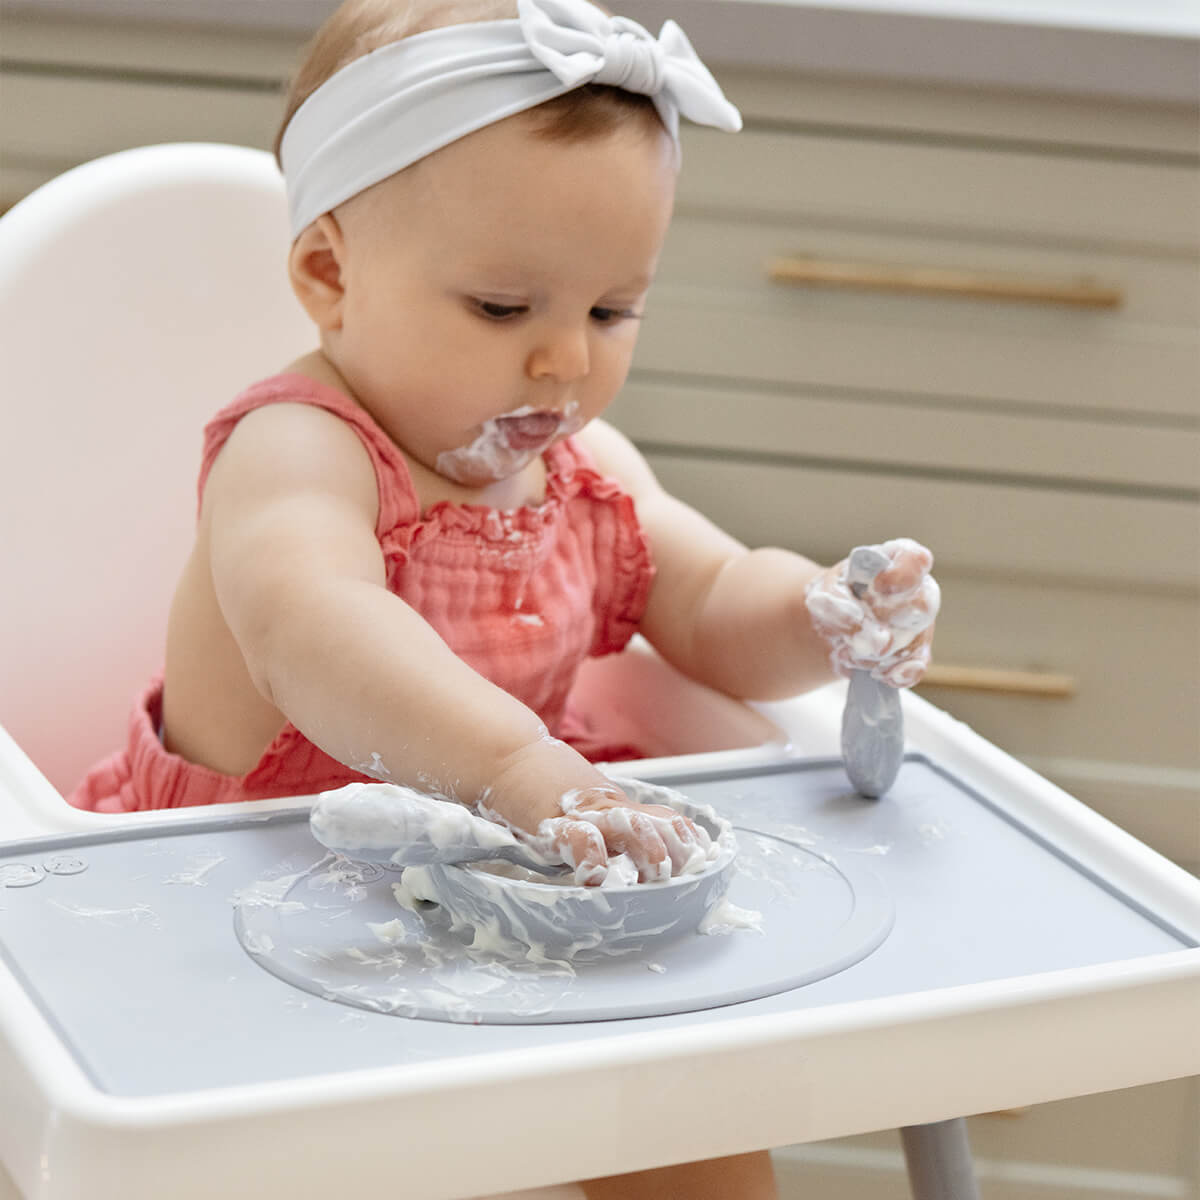 The Tiny Placemat in Pewter is a non-slip, silicone placemat that fits on most highchair trays